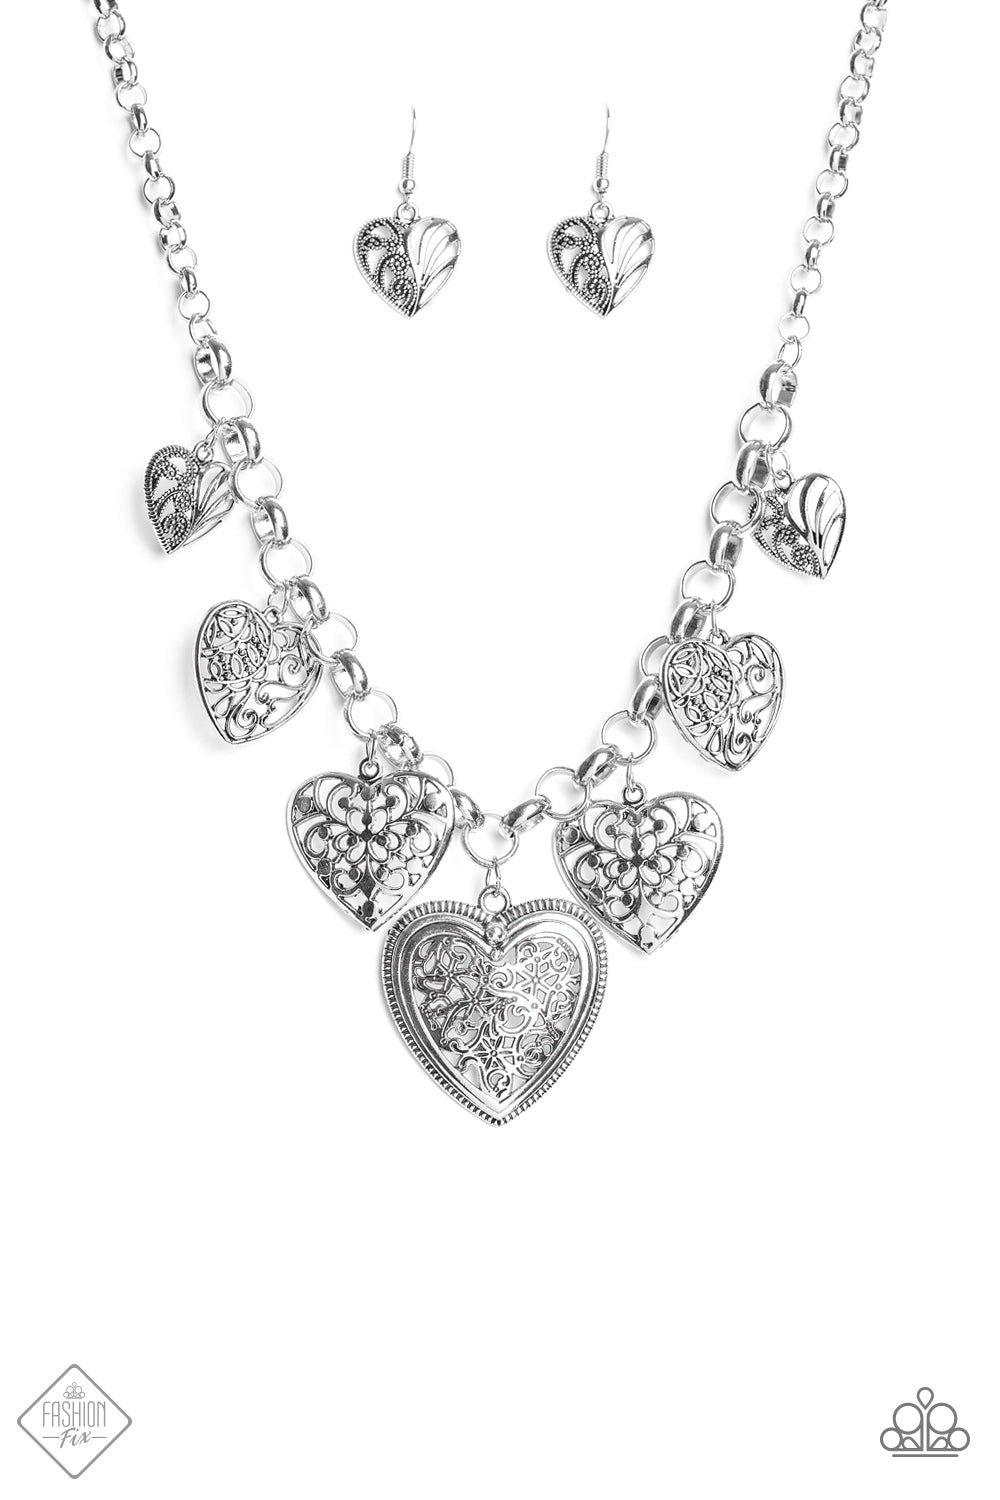 Paparazzi Love Lockets Heart Necklaces Clearance